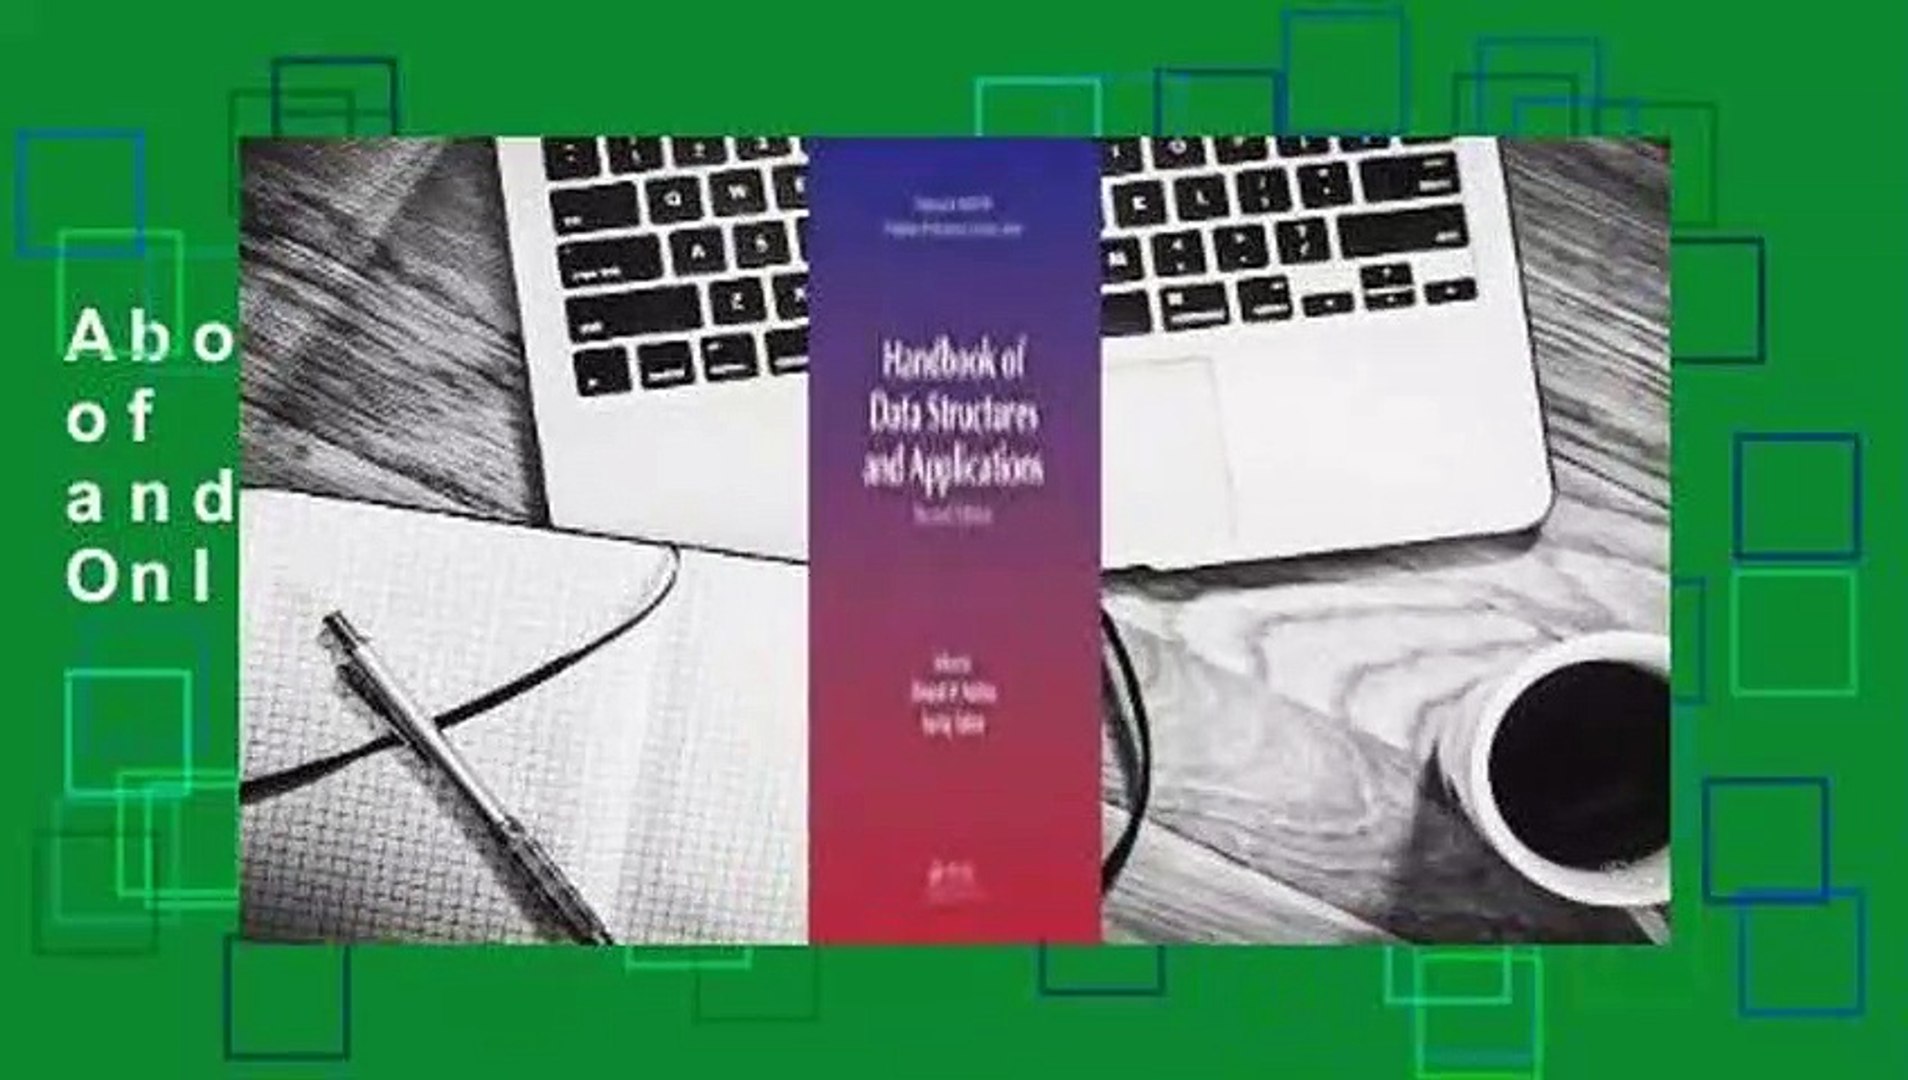 About For Books  Handbook of Data Structures and Applications  For Online